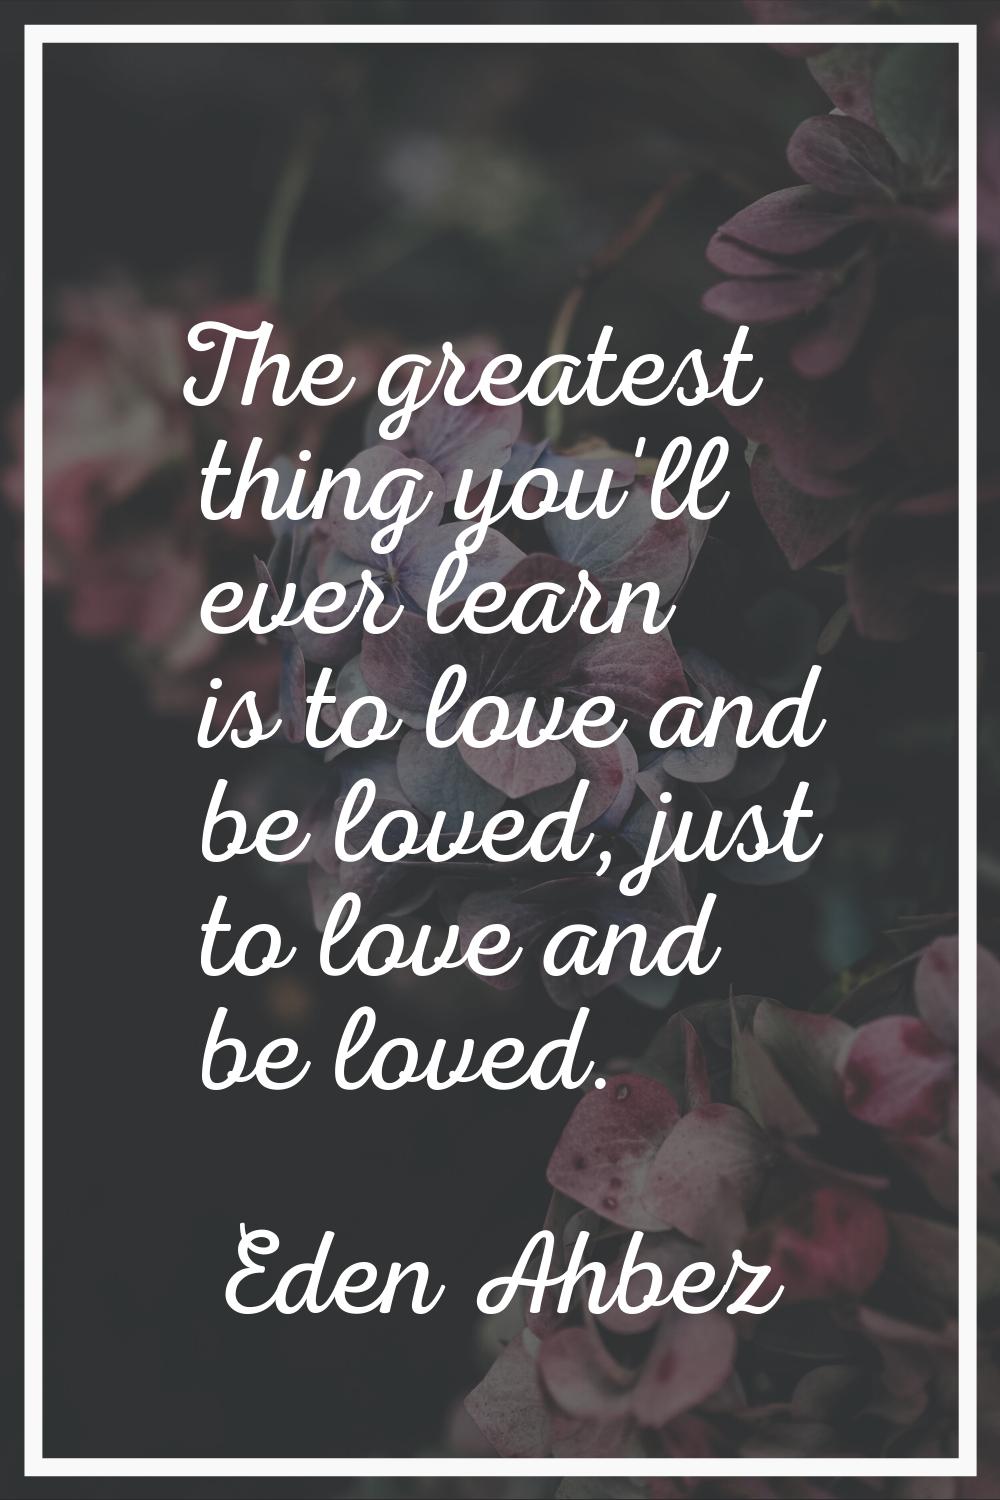 The greatest thing you'll ever learn is to love and be loved, just to love and be loved.